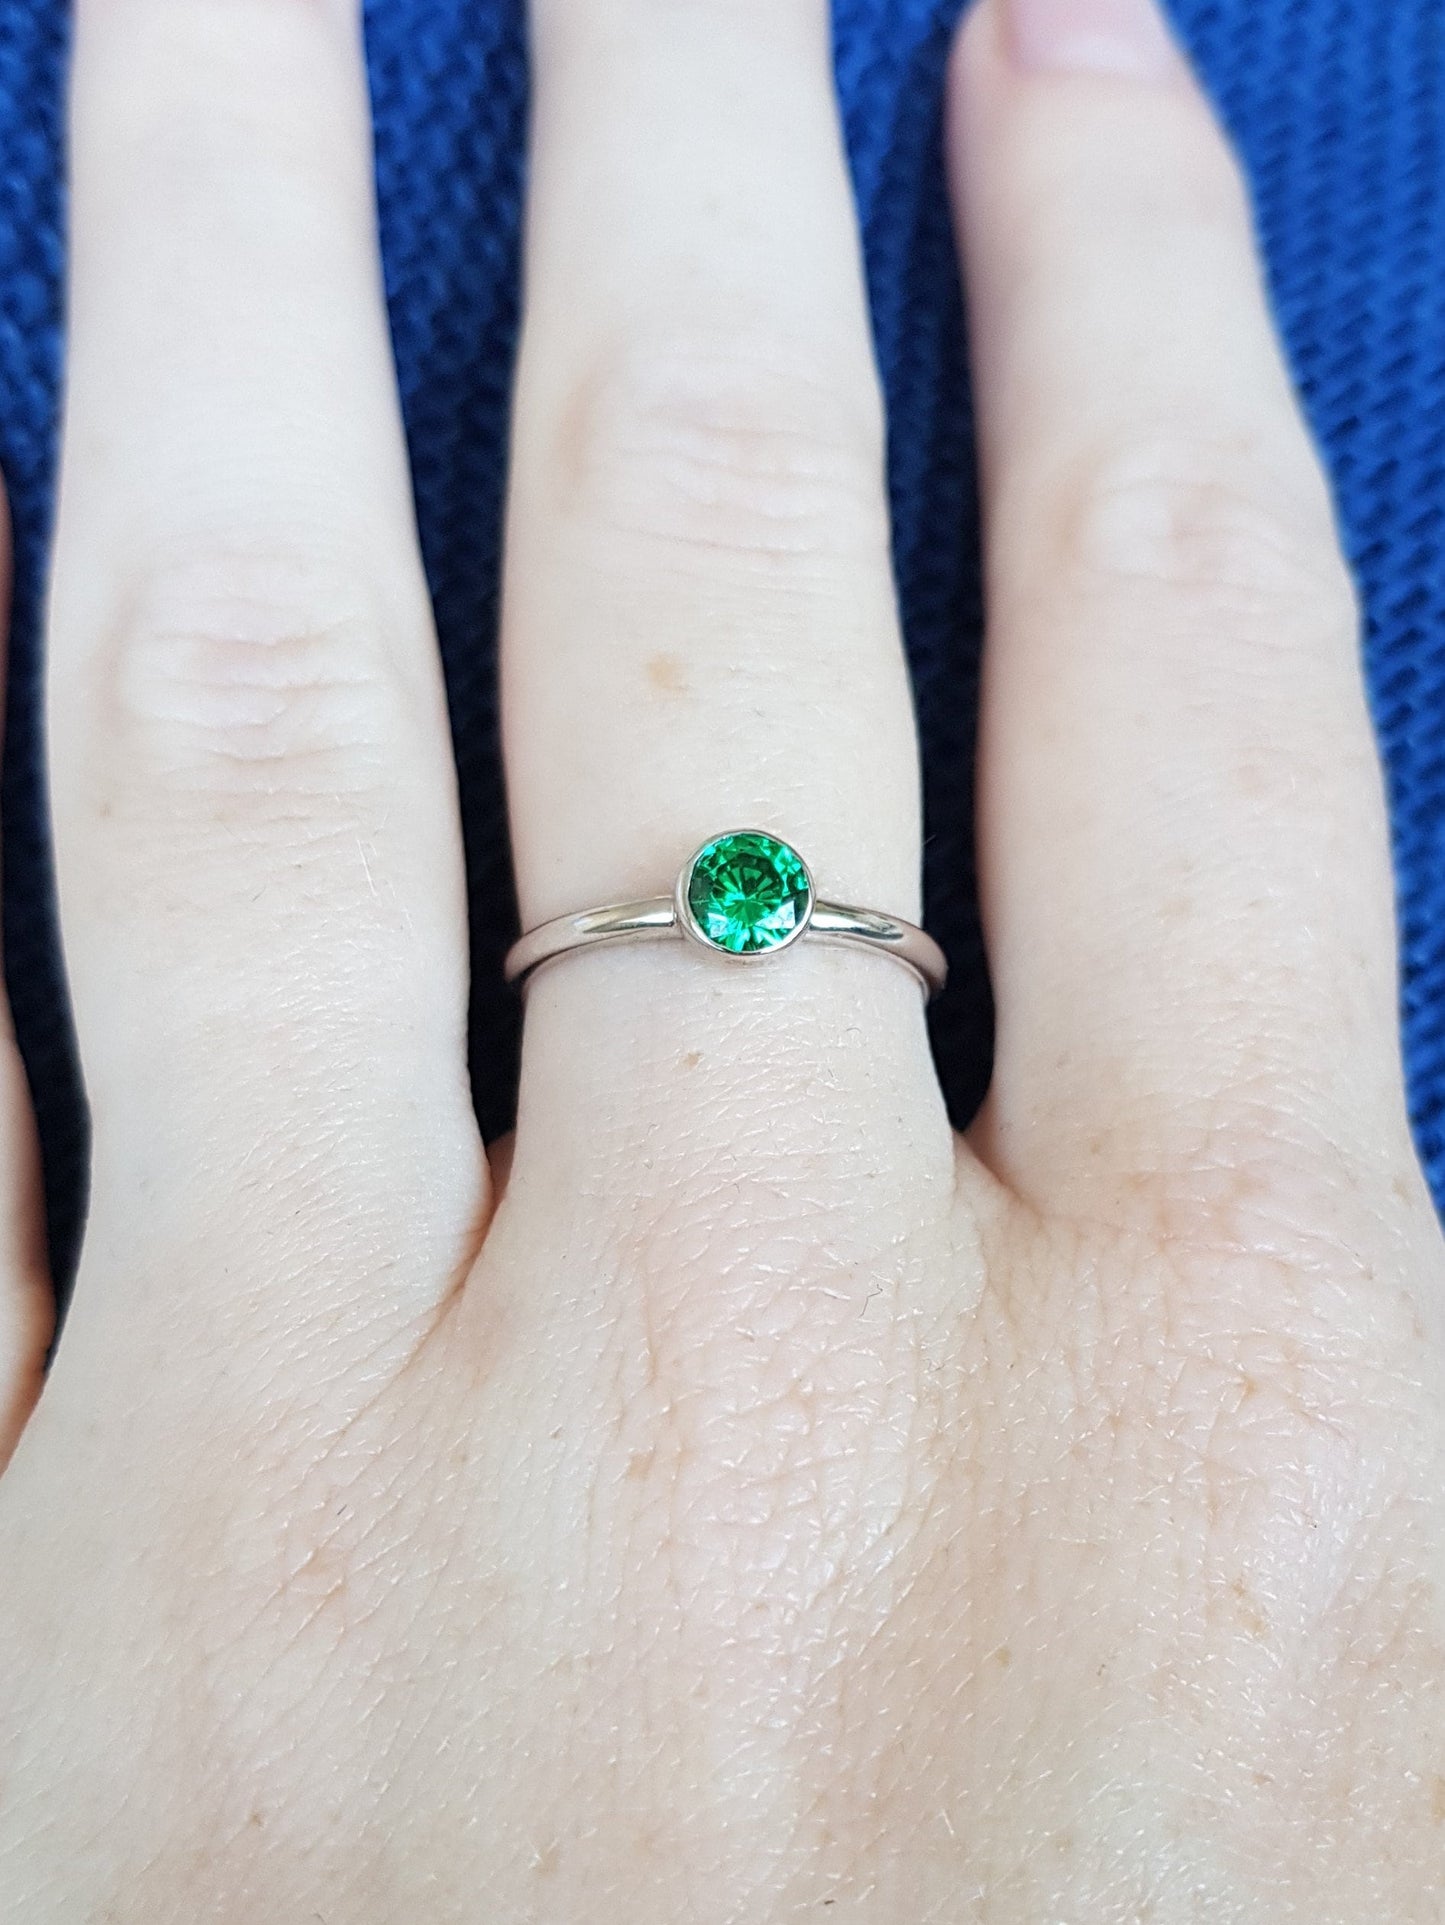 Lab Emerald bezel set solitaire ring - Available in white gold or sterling silver - handmade ring